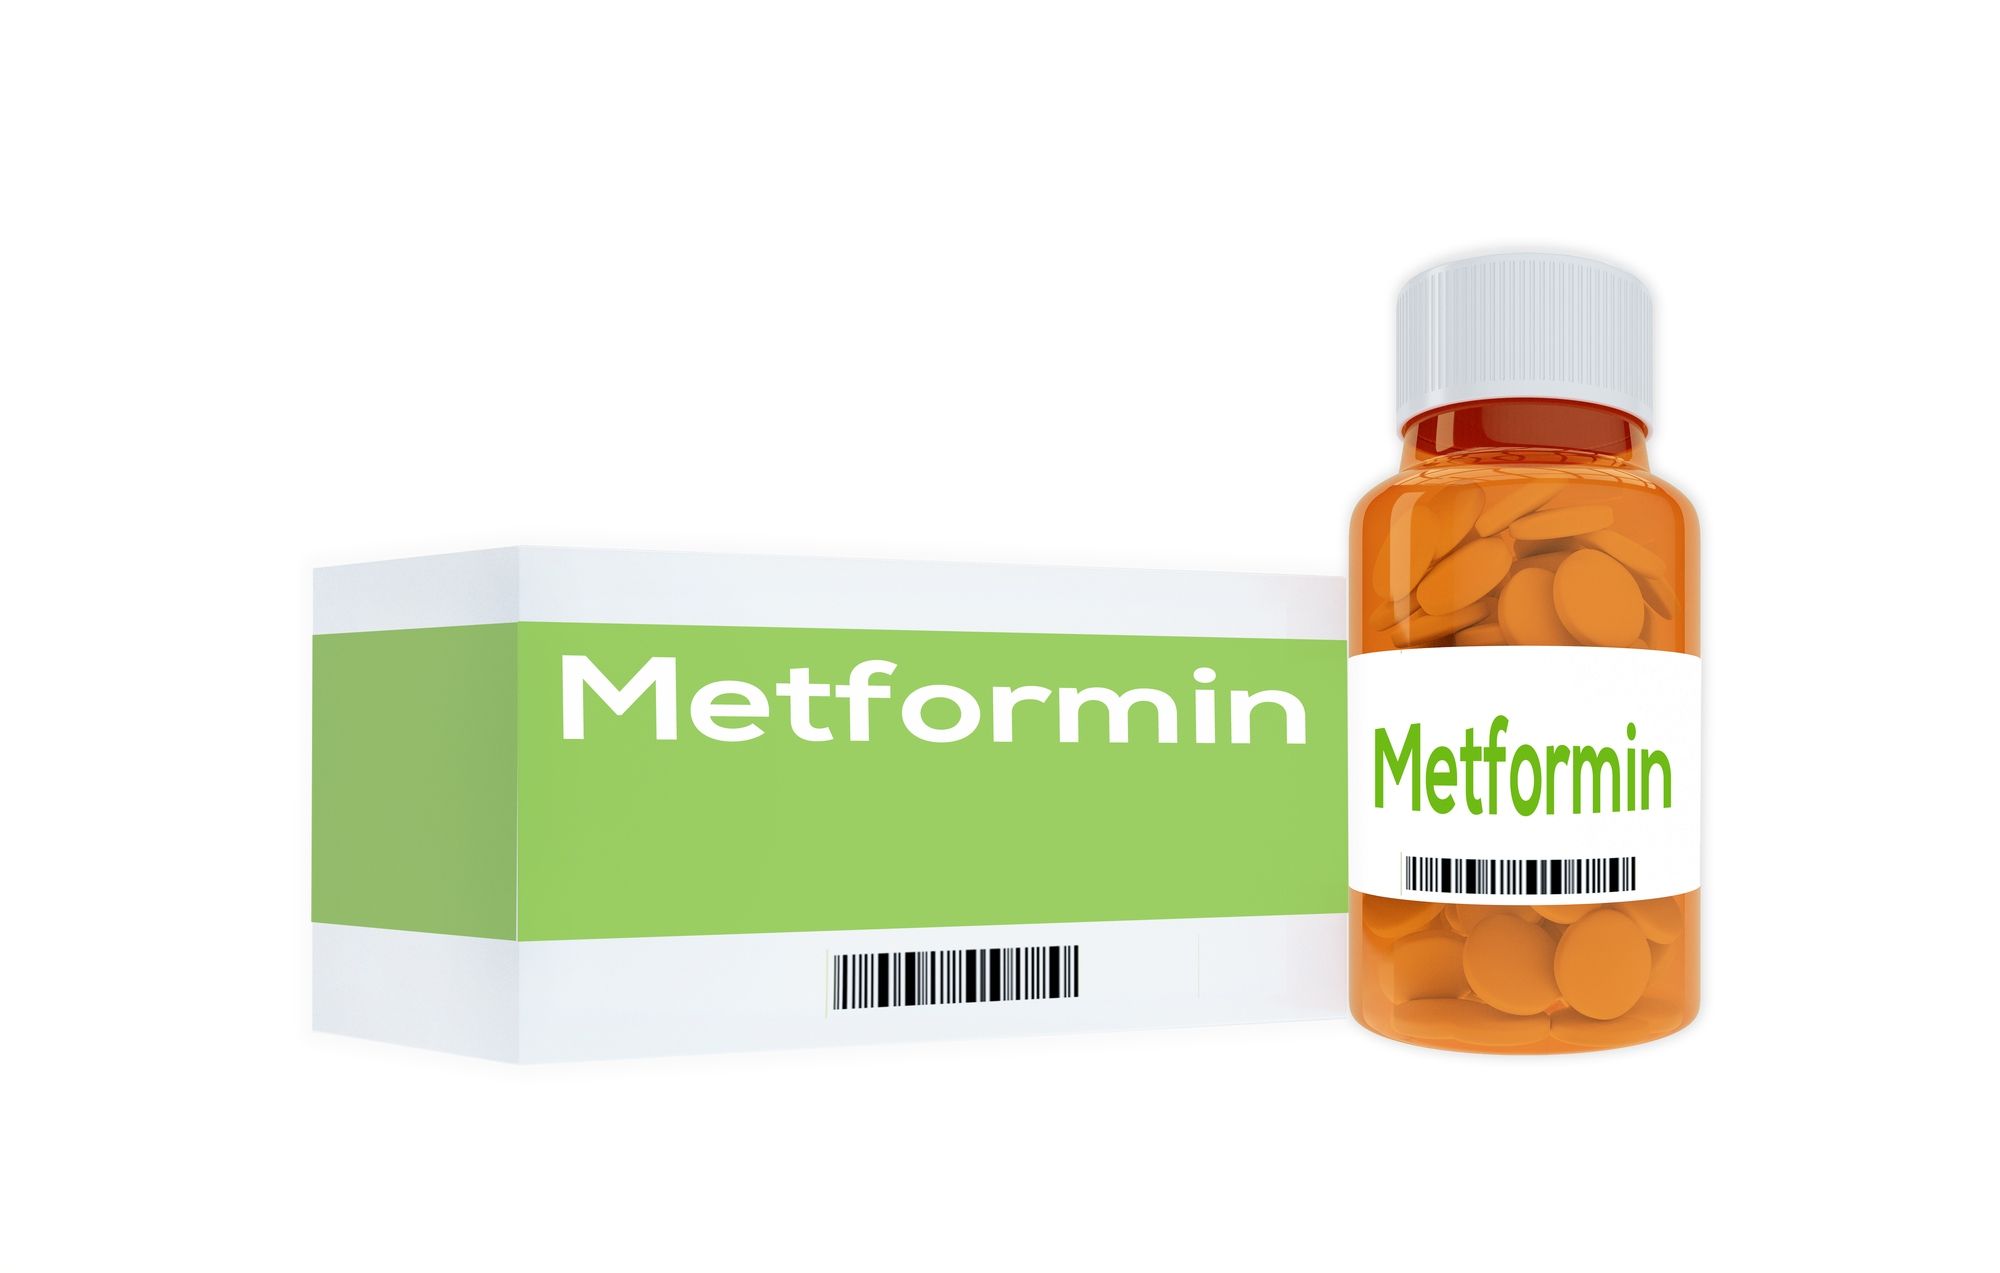 Metformin medicine bottle and box regarding the class action lawsuit over its cancer risk